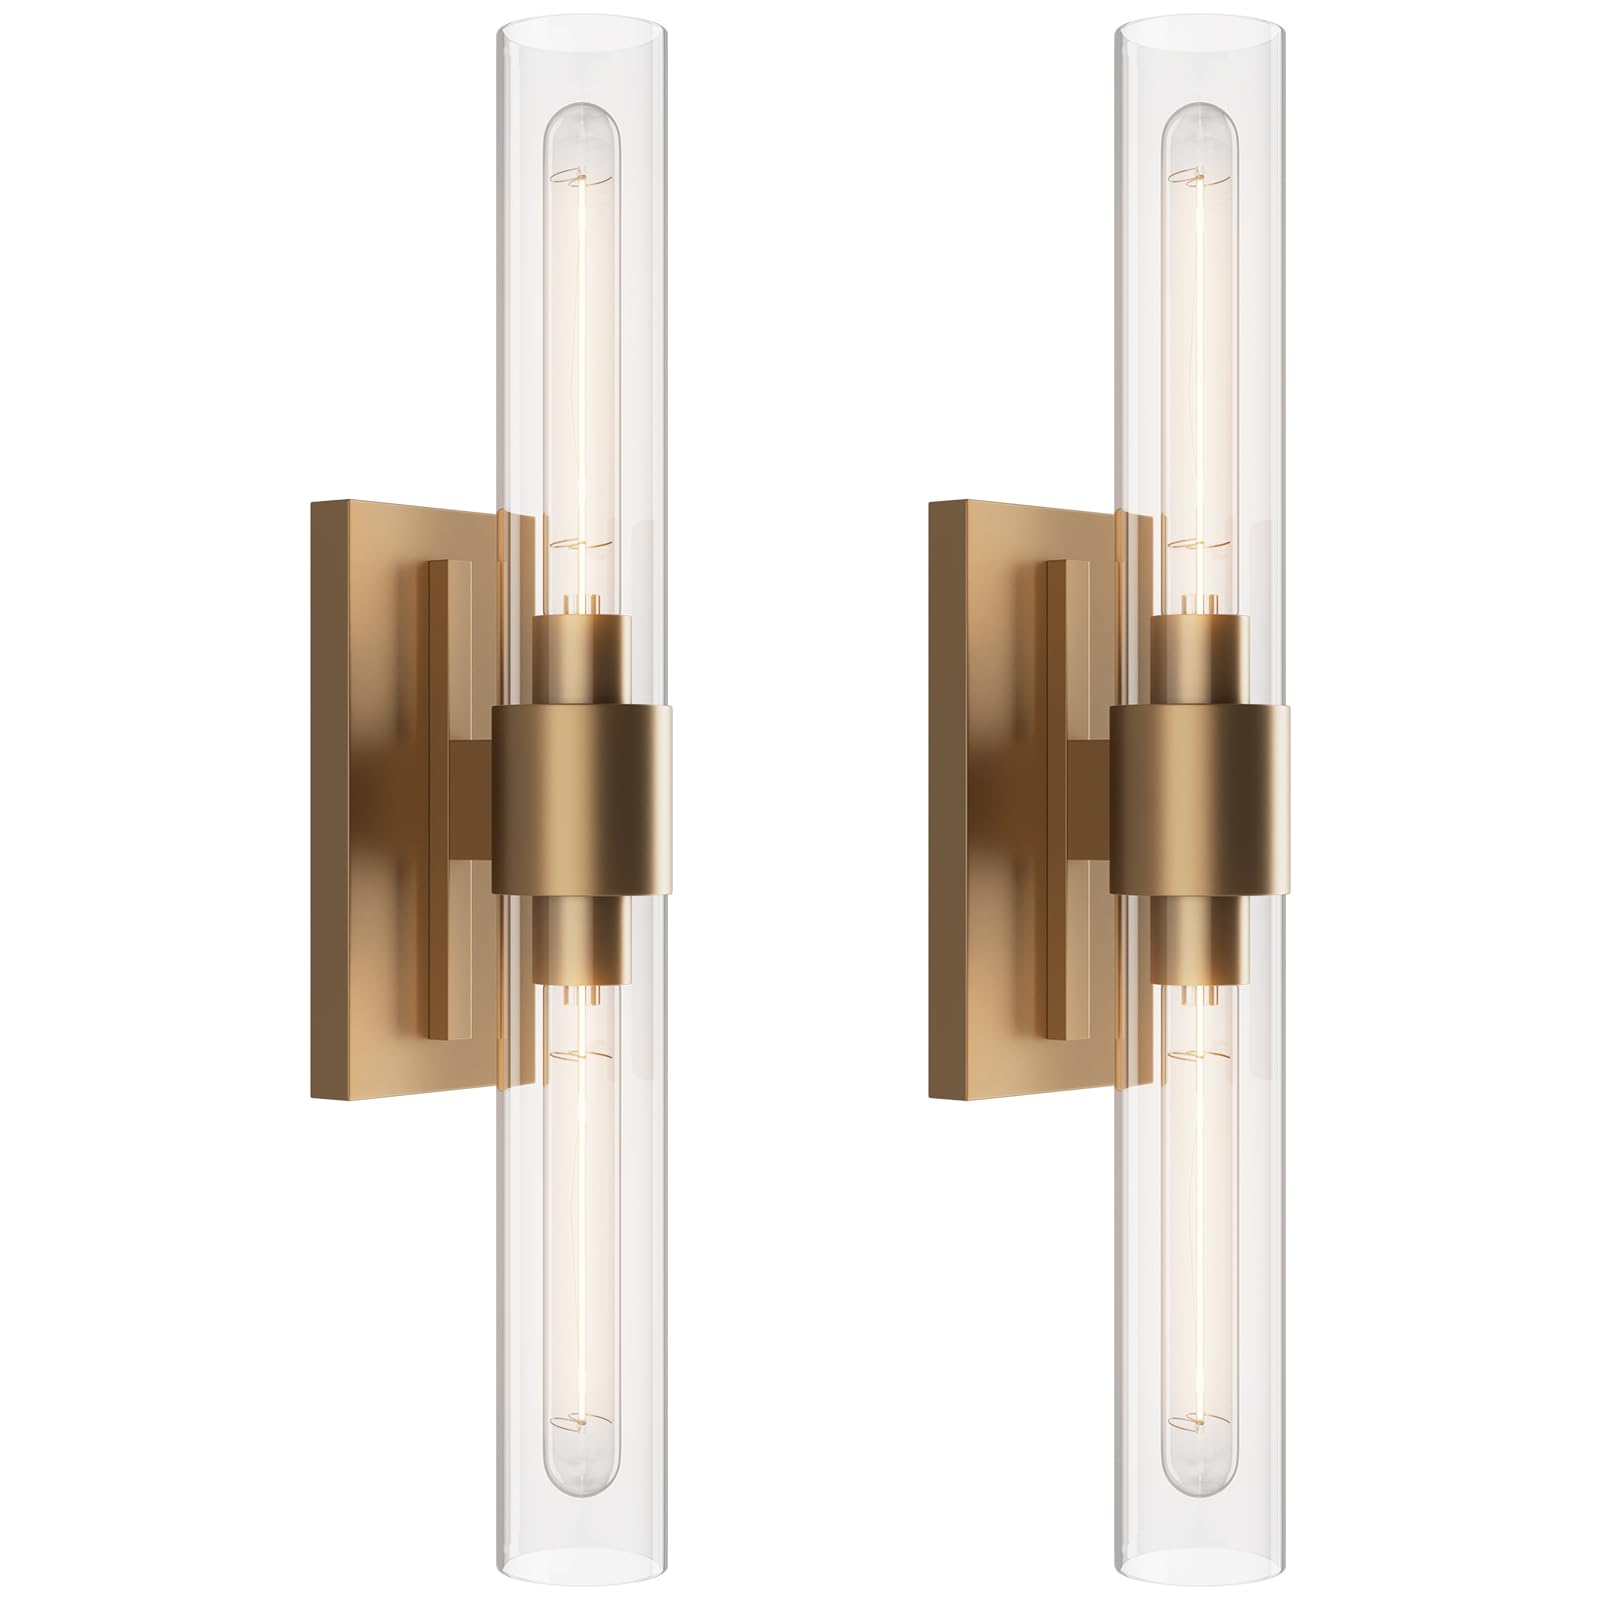 Brass Wall Sconces Set of Two, 22.8" Sconces Wall Lighting with Clear Glass Shade, Vanity Light 2-Light Wall Lamp for Mirror, Living Room, Bedroom, Hallway Including Bulb